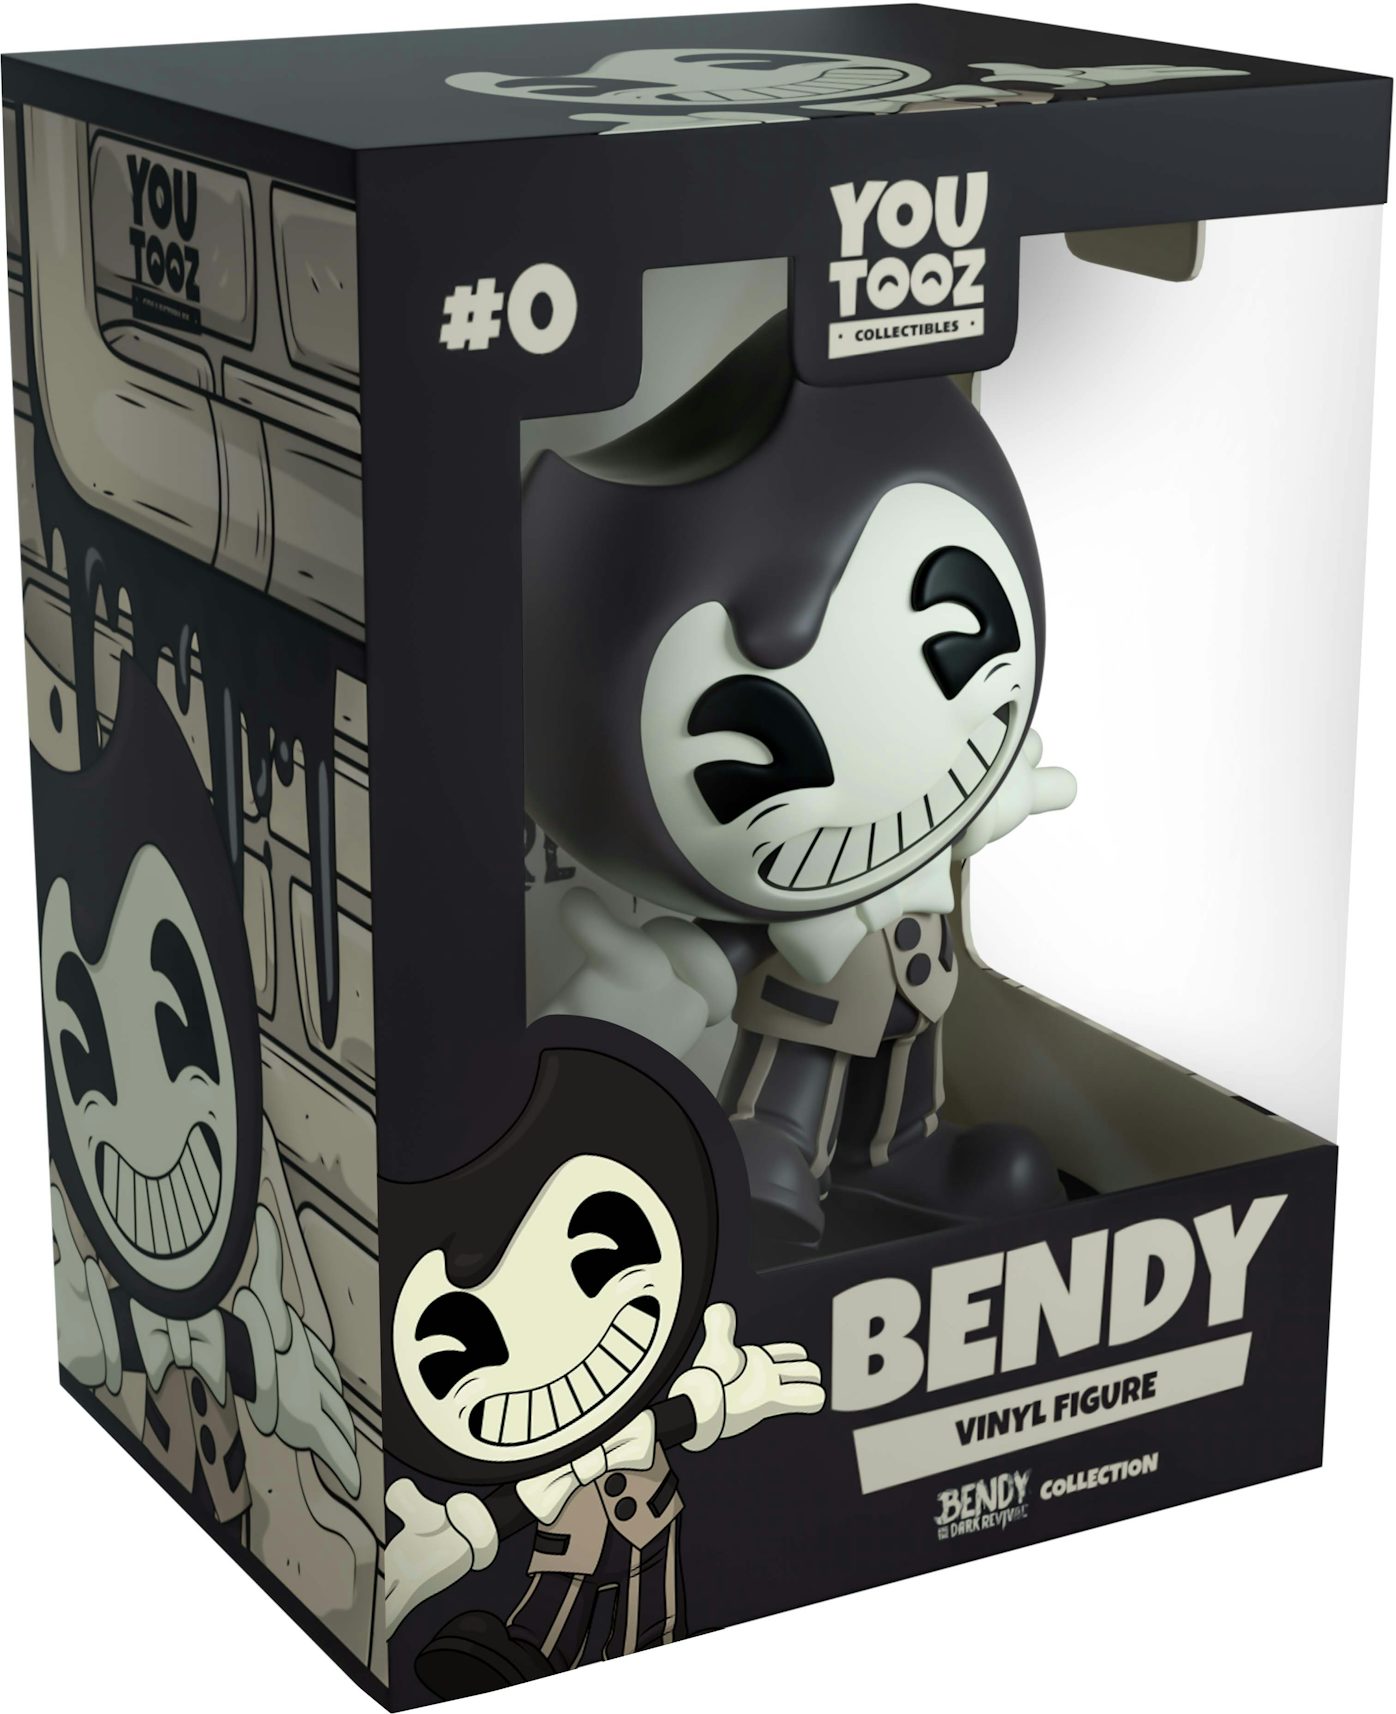 Bendy and the Dark Revival for PS5, Xbox Series, PS4, and Xbox One